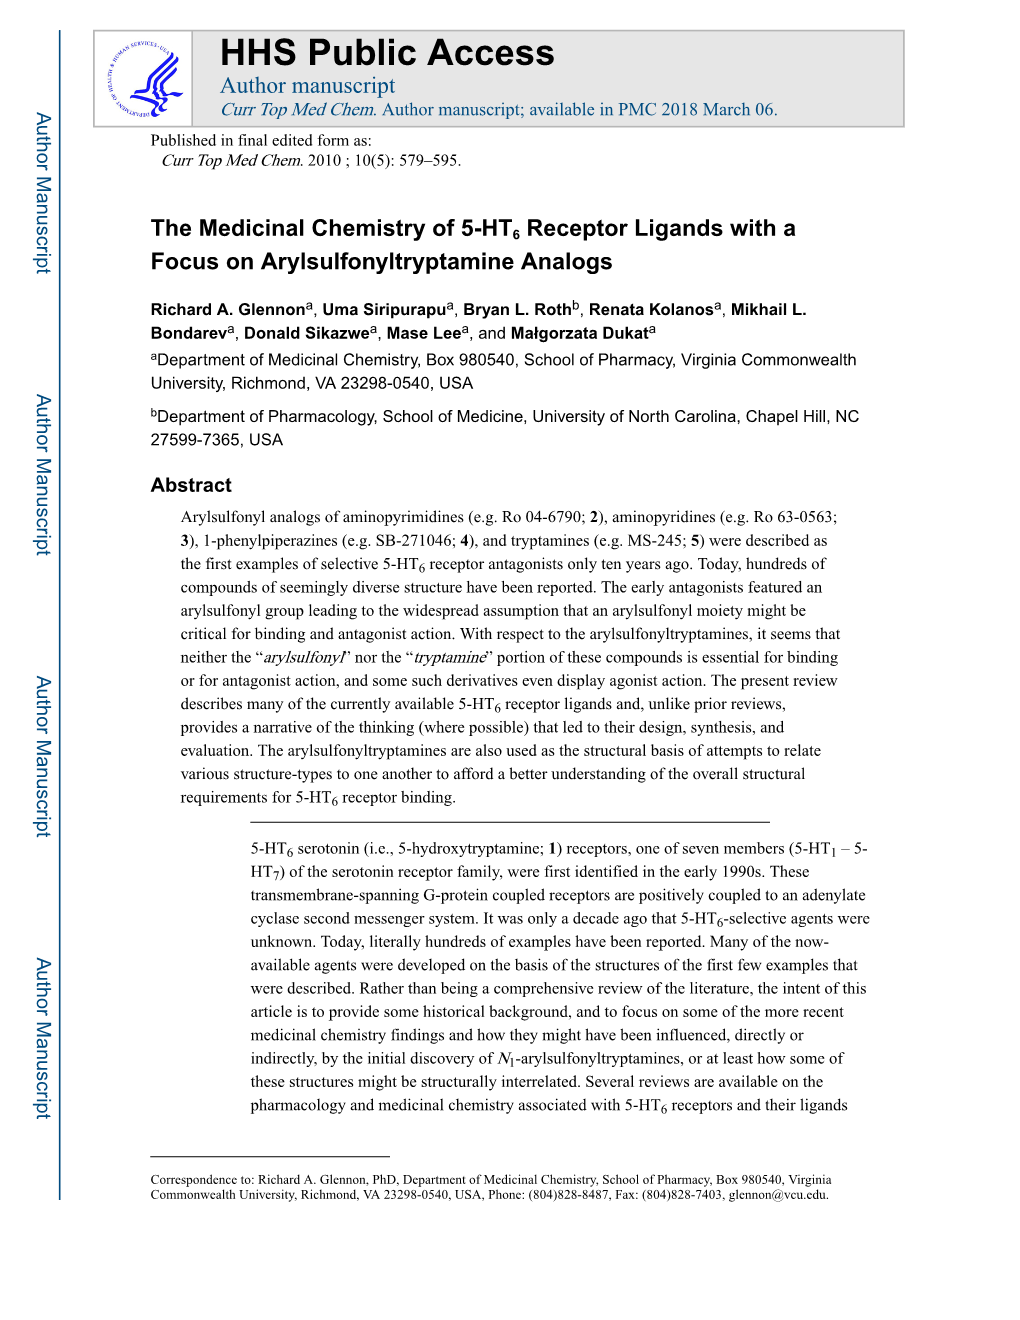 The Medicinal Chemistry of 5-HT6 Receptor Ligands with a Focus on Arylsulfonyltryptamine Analogs